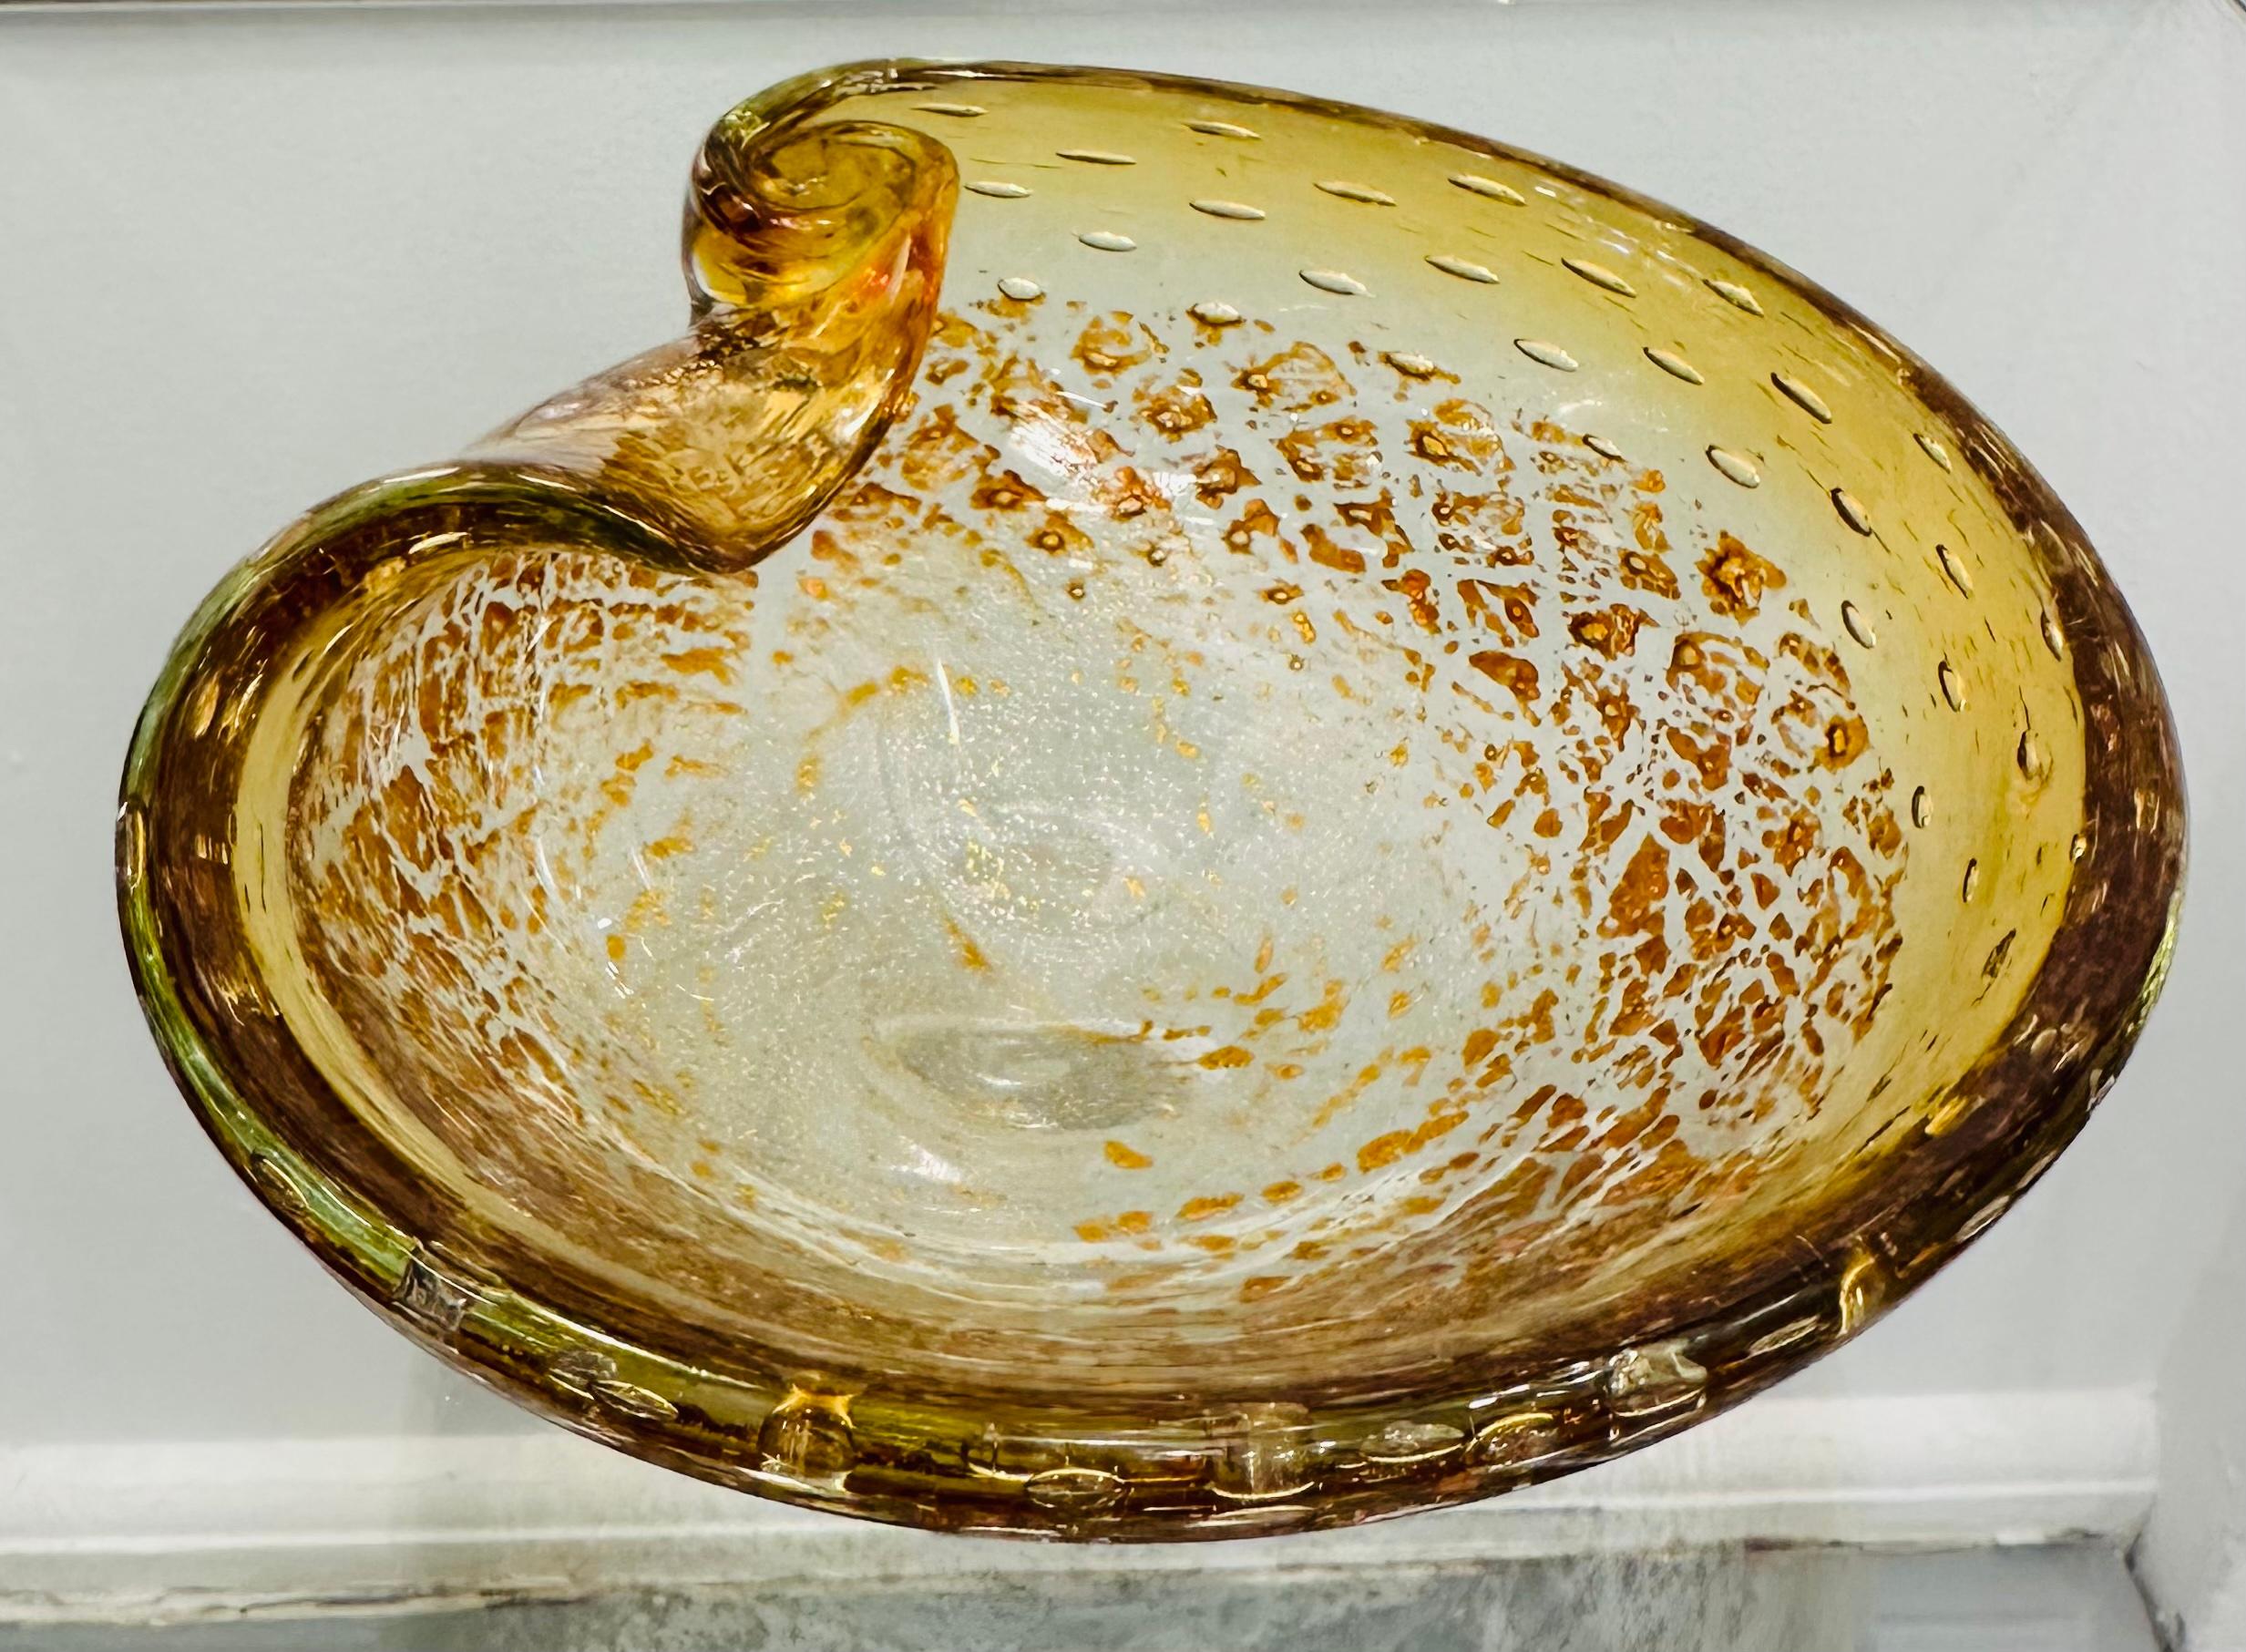 Murano Glass 1960s Italian Murano Golden Inclusion Clear Glass Bowl, Candy Dish or Ashtray For Sale